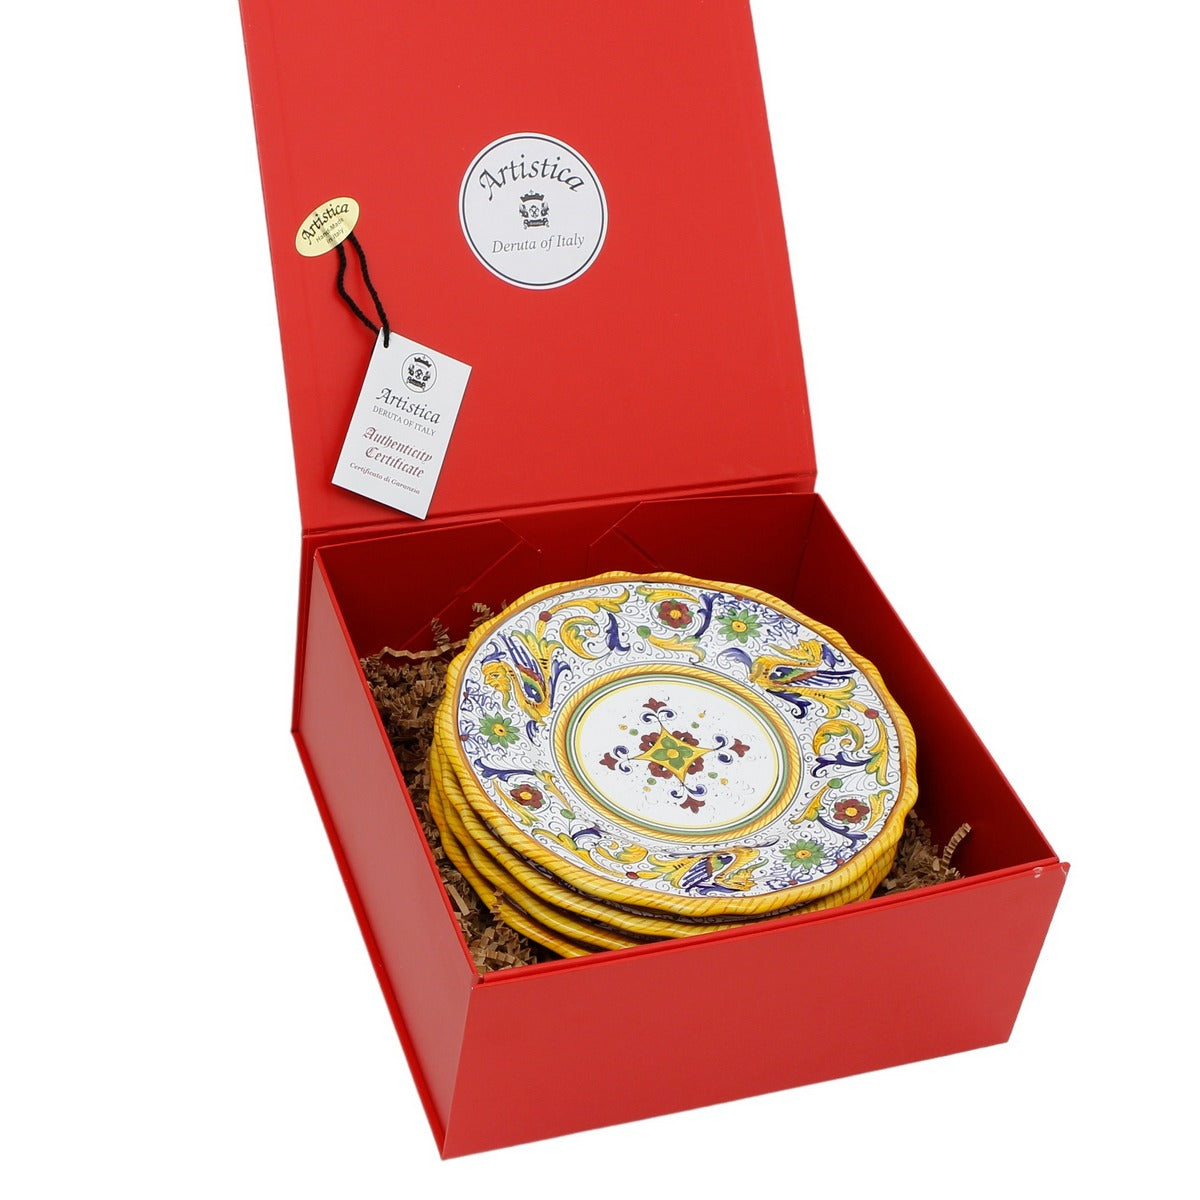 GIFT BOX: DeLuxe Glossy Red Gift Box with Raffaellesco Salad Plates (Set of 4 pcs)